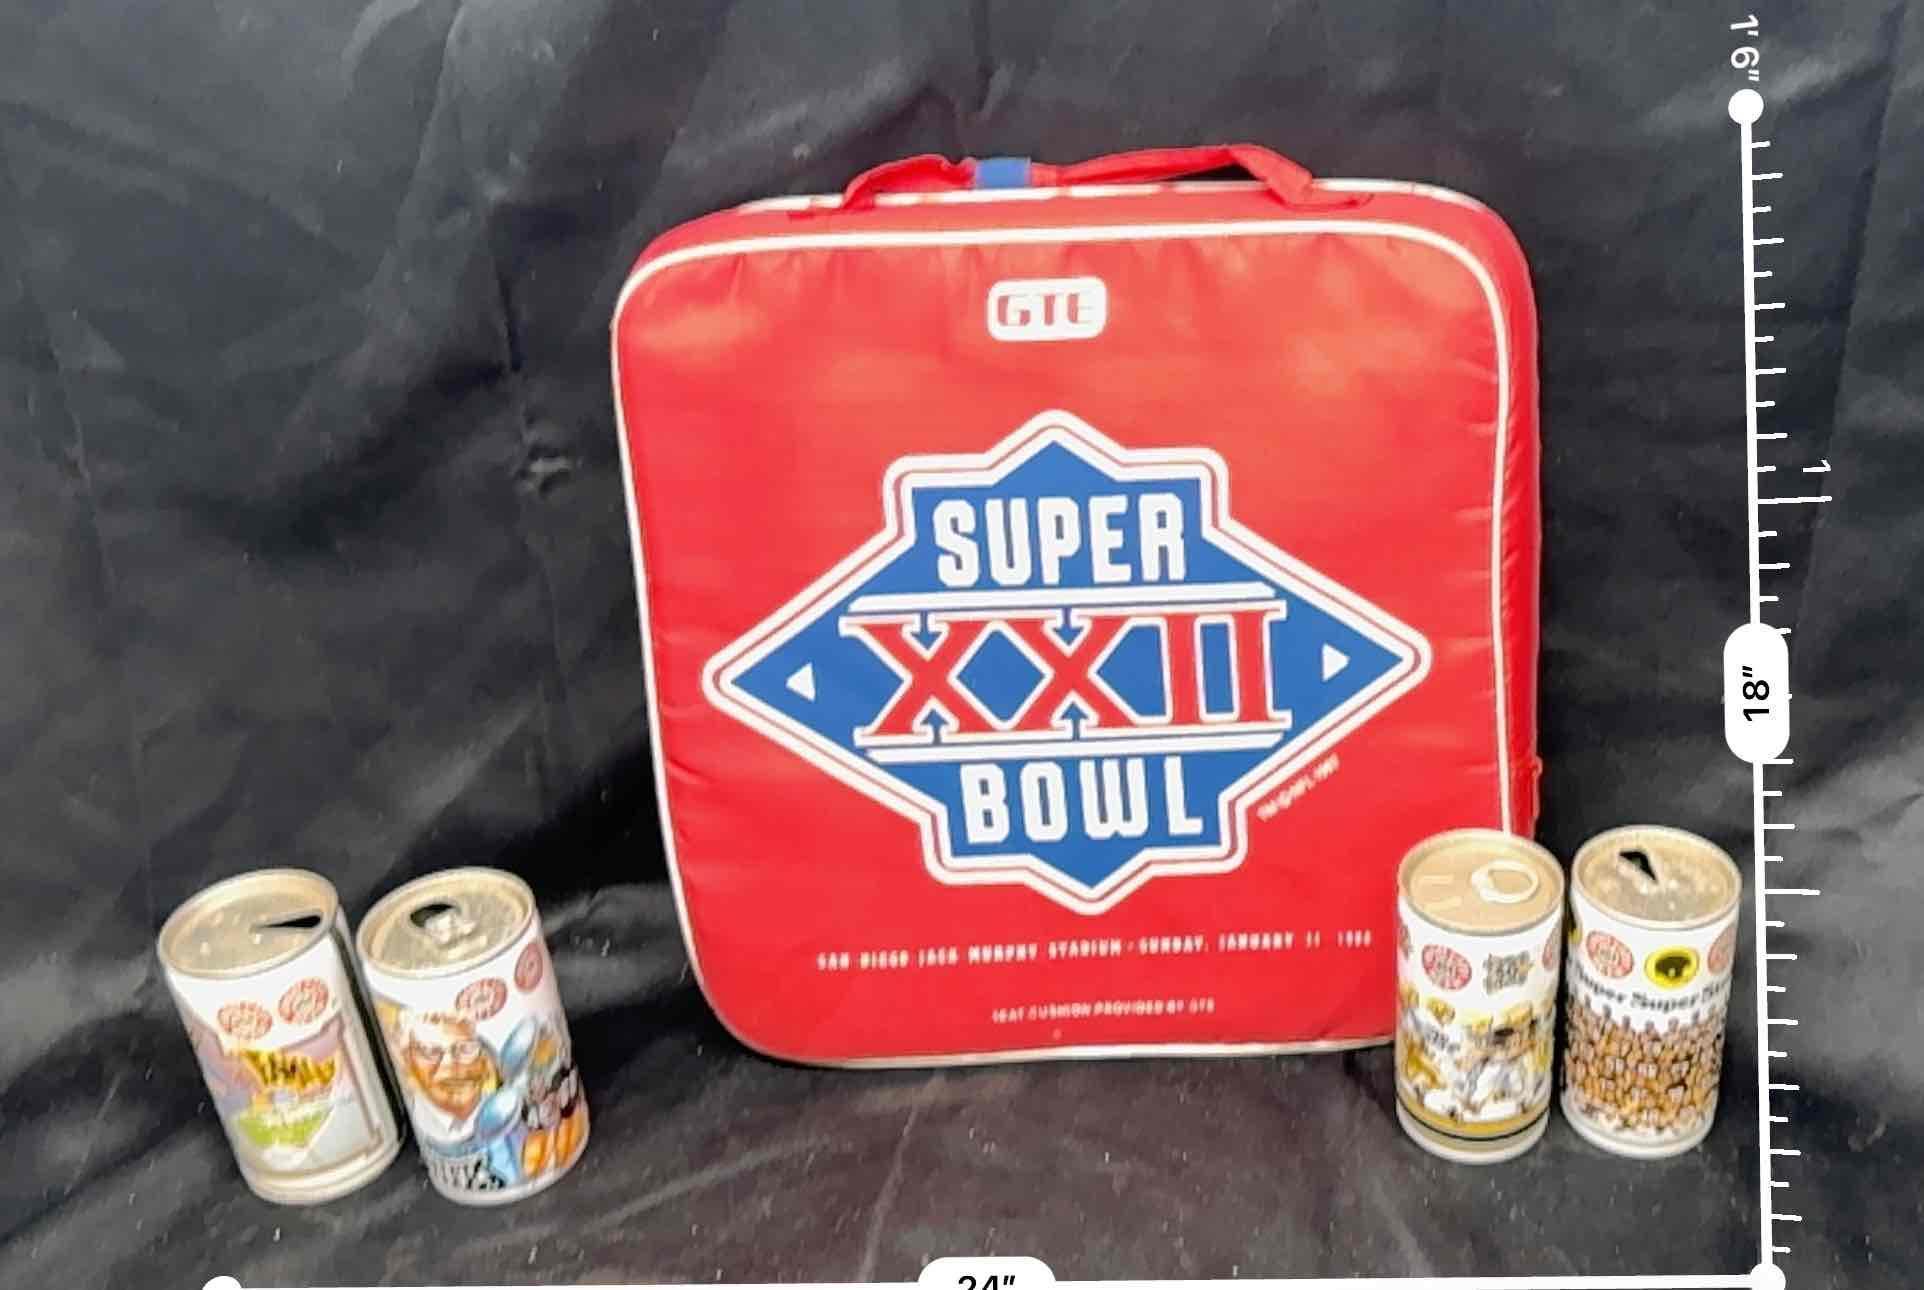 San Diego Super Bowl XXII Seat Pad and Collectible Football Cans